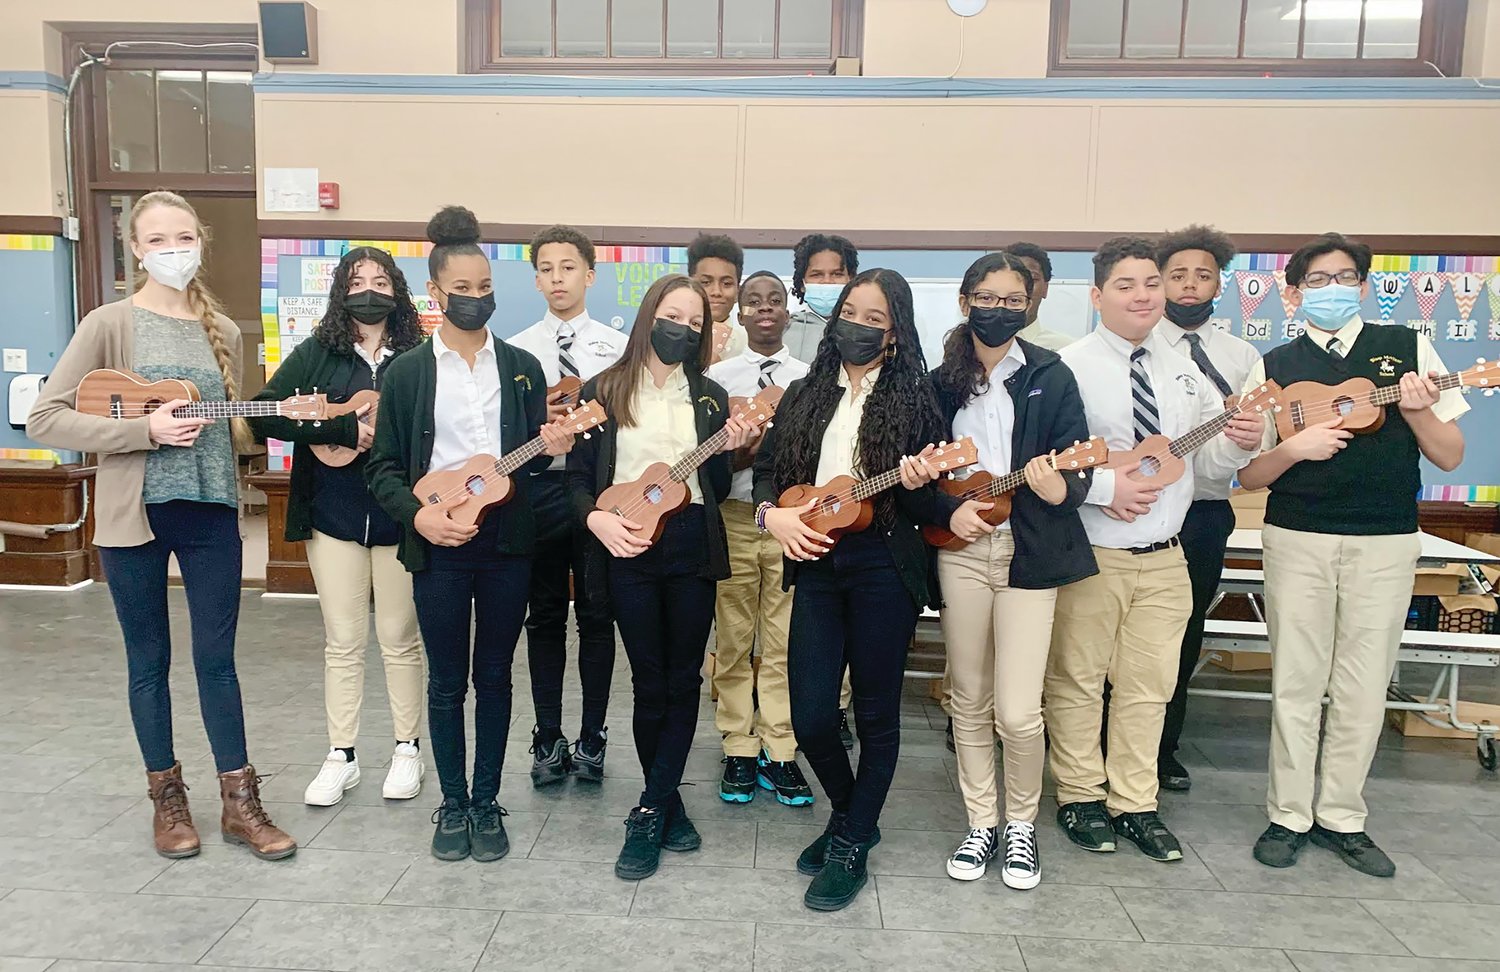 The seventh grade class from McVinney School in Providence smiles while holding their new ukuleles that were recently donated to the school on behalf of McVinney Auditorium, an agency of the Diocese of Providence. The school expressed their gratitude for this donation to their music program.